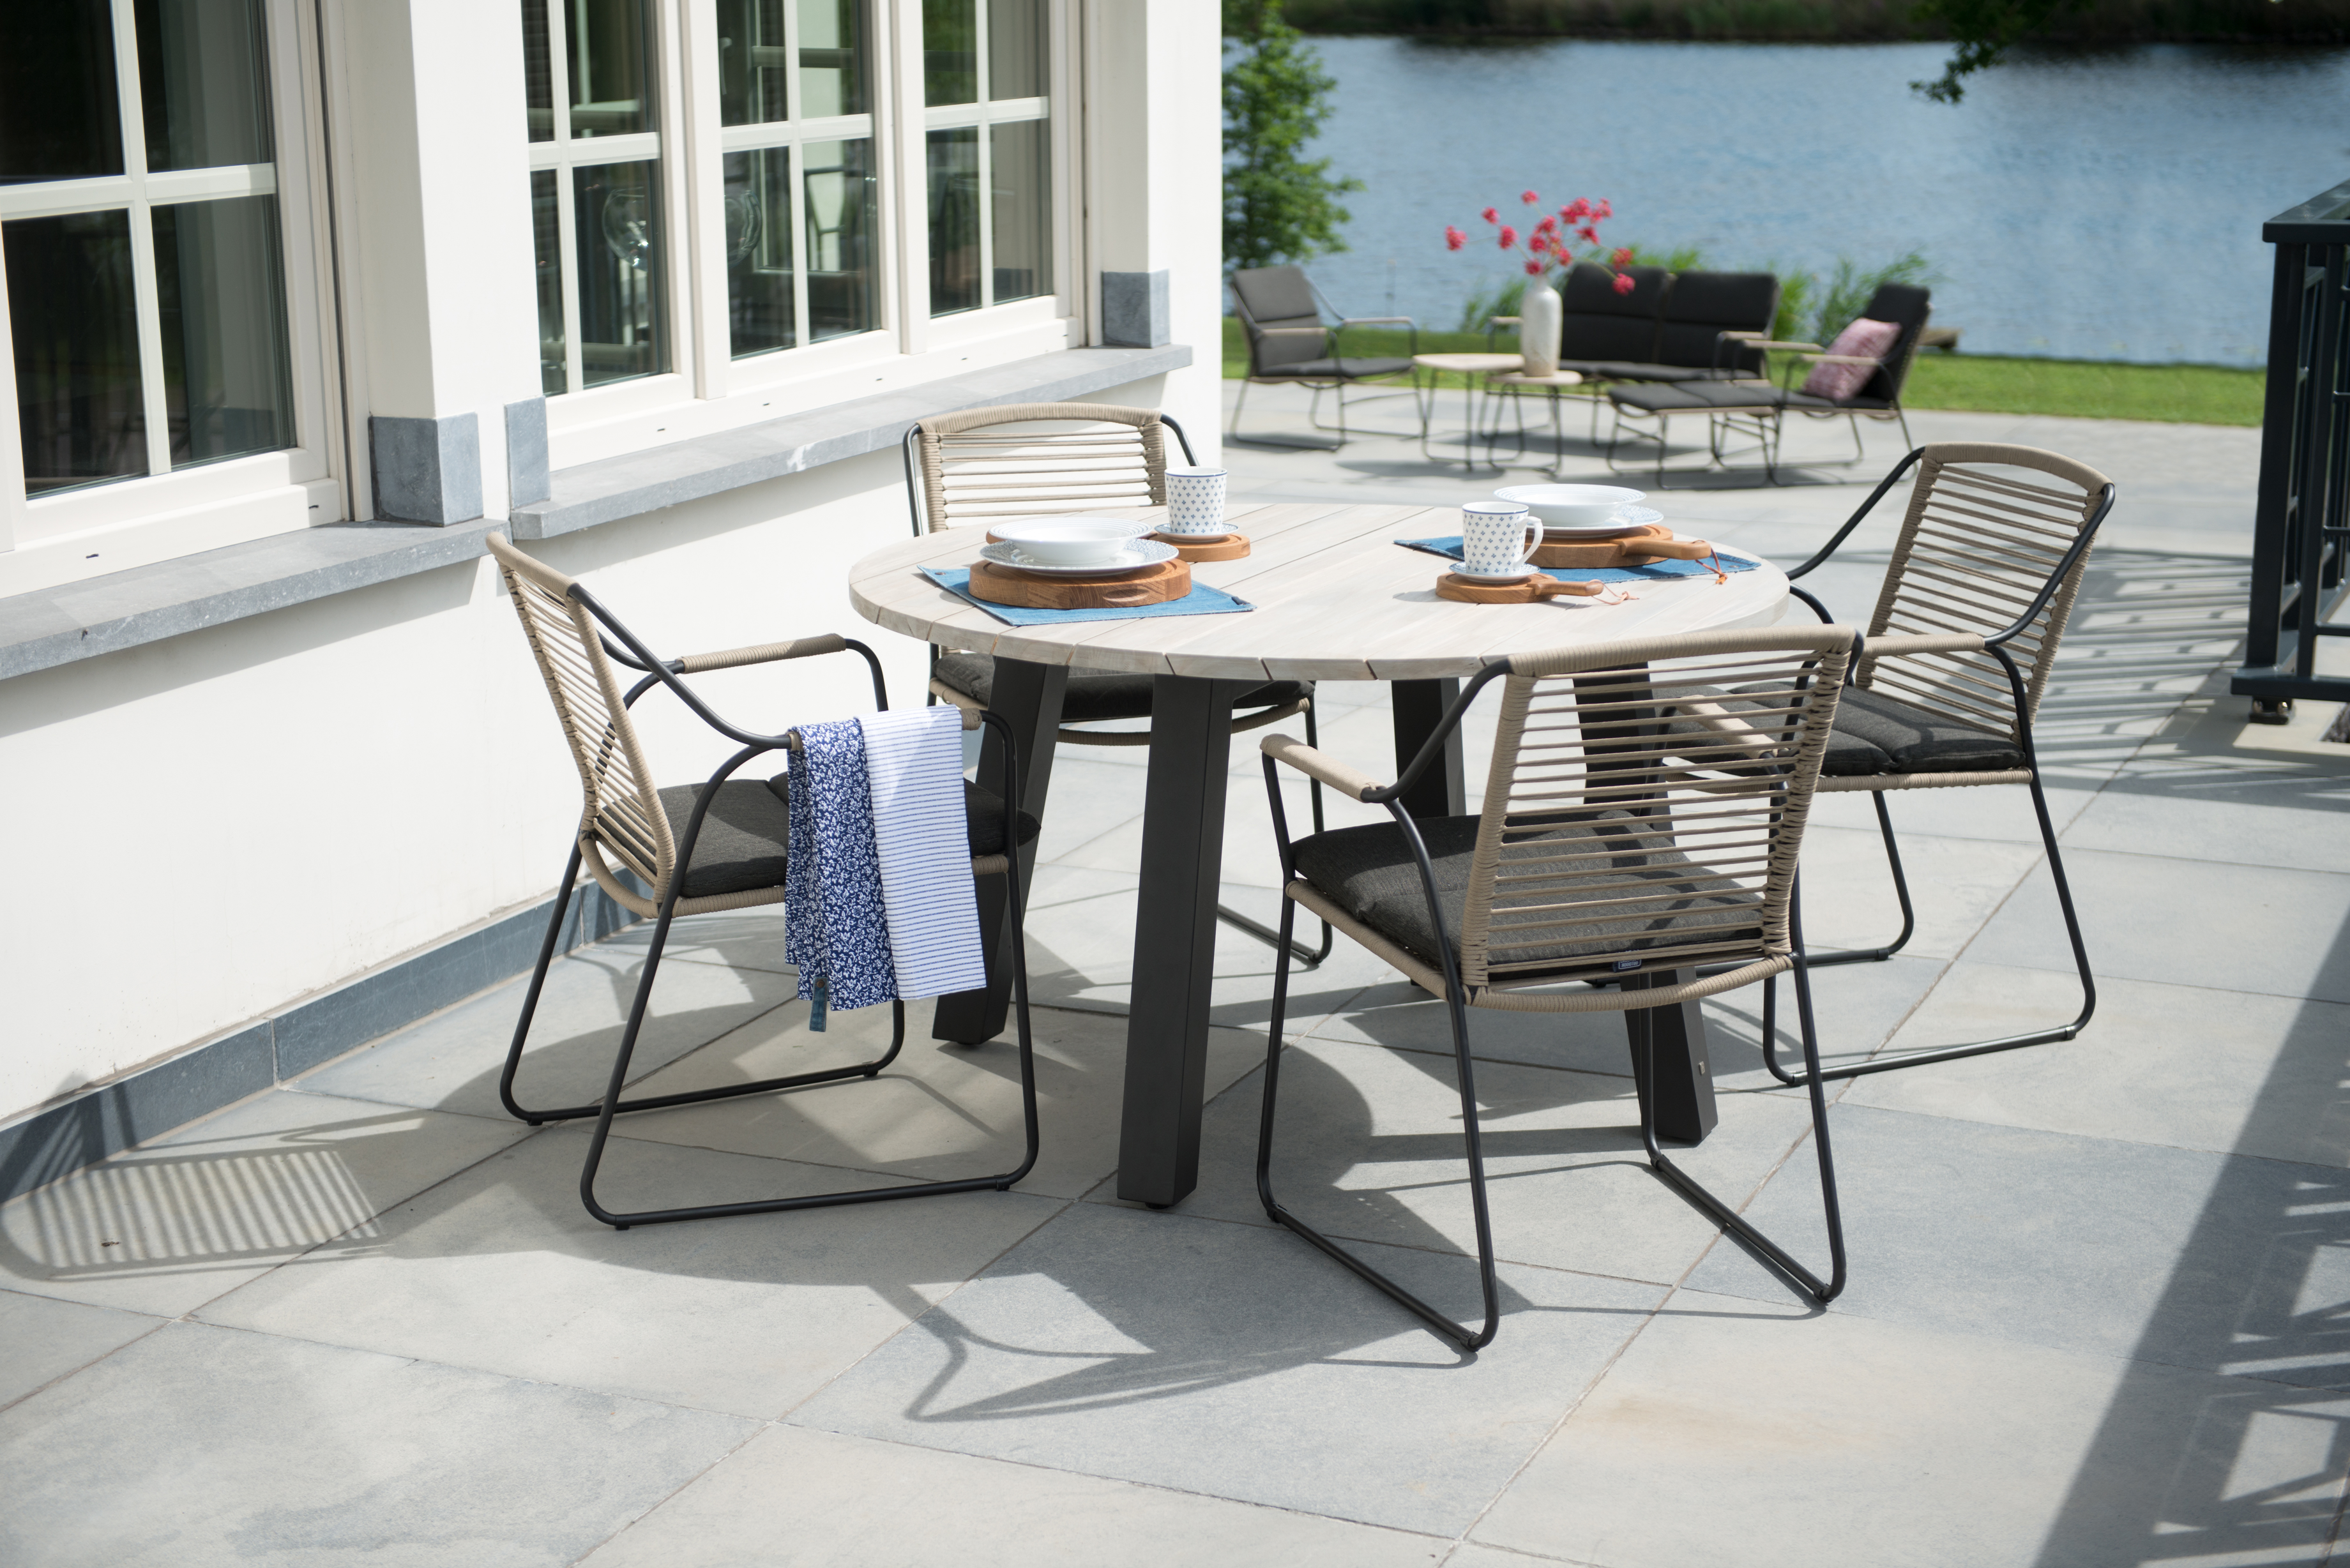 4 Seasons Outdoor Scandic Dining Chair With Cushion (Packed In 2's)